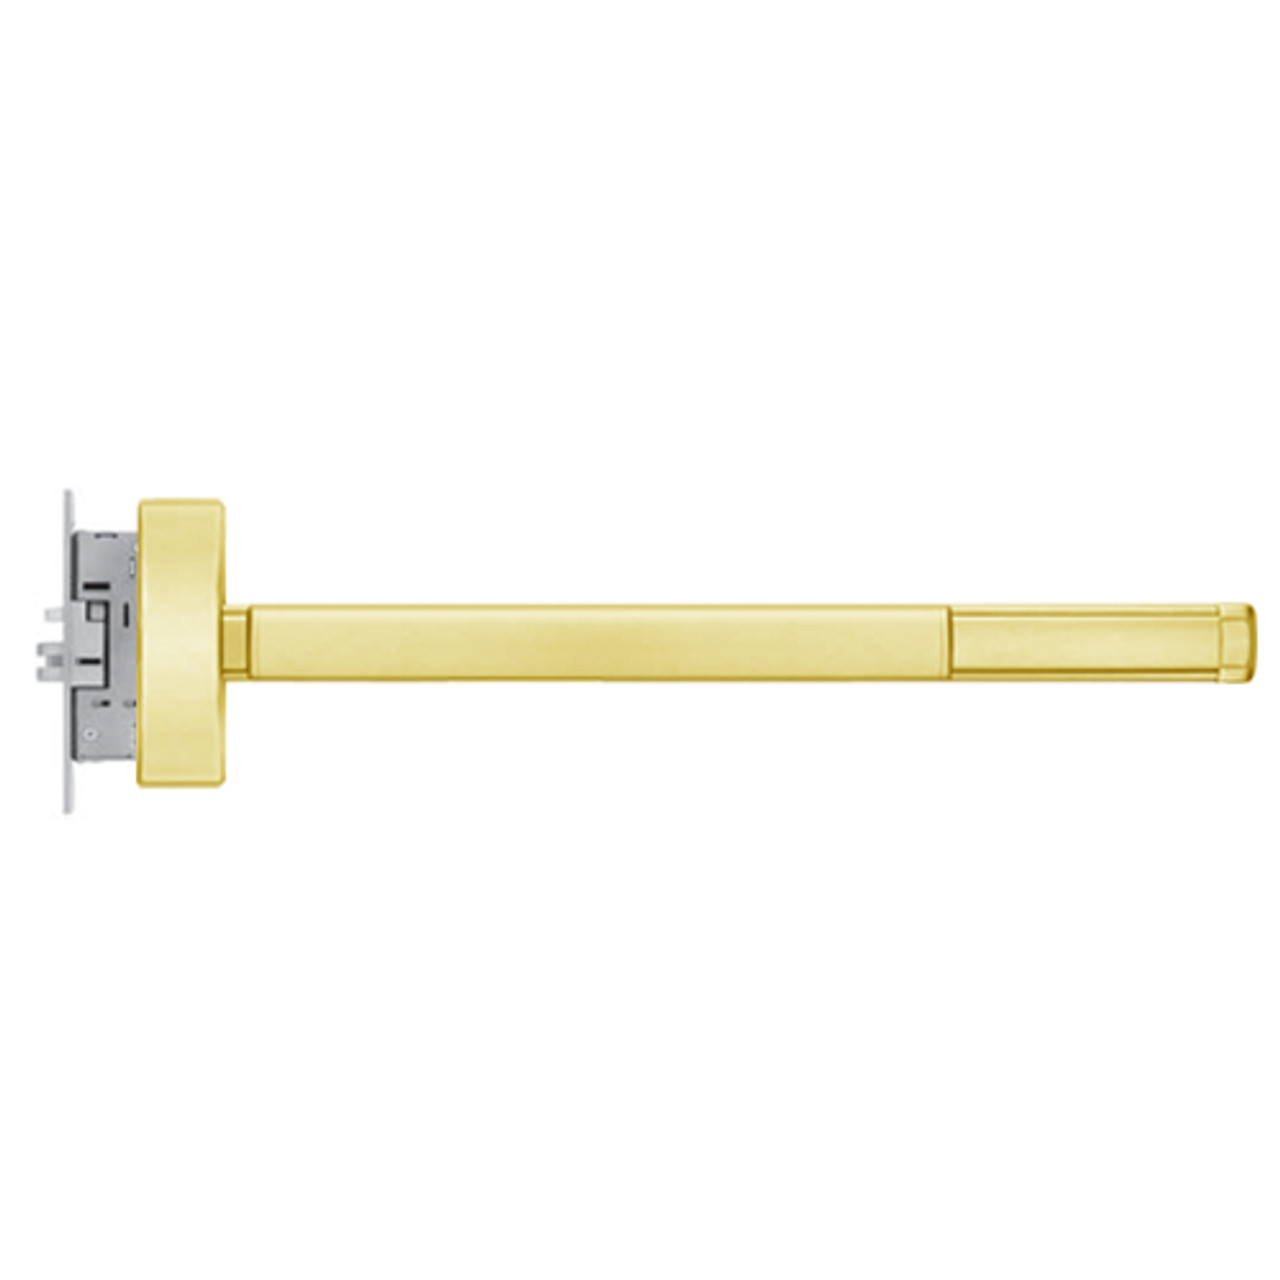 TS2315-RHR-605-48 PHI 2300 Series Apex Mortise Exit Device with Touchbar Monitoring Switch Prepped for Thumb Piece Always Active in Bright Brass Finish